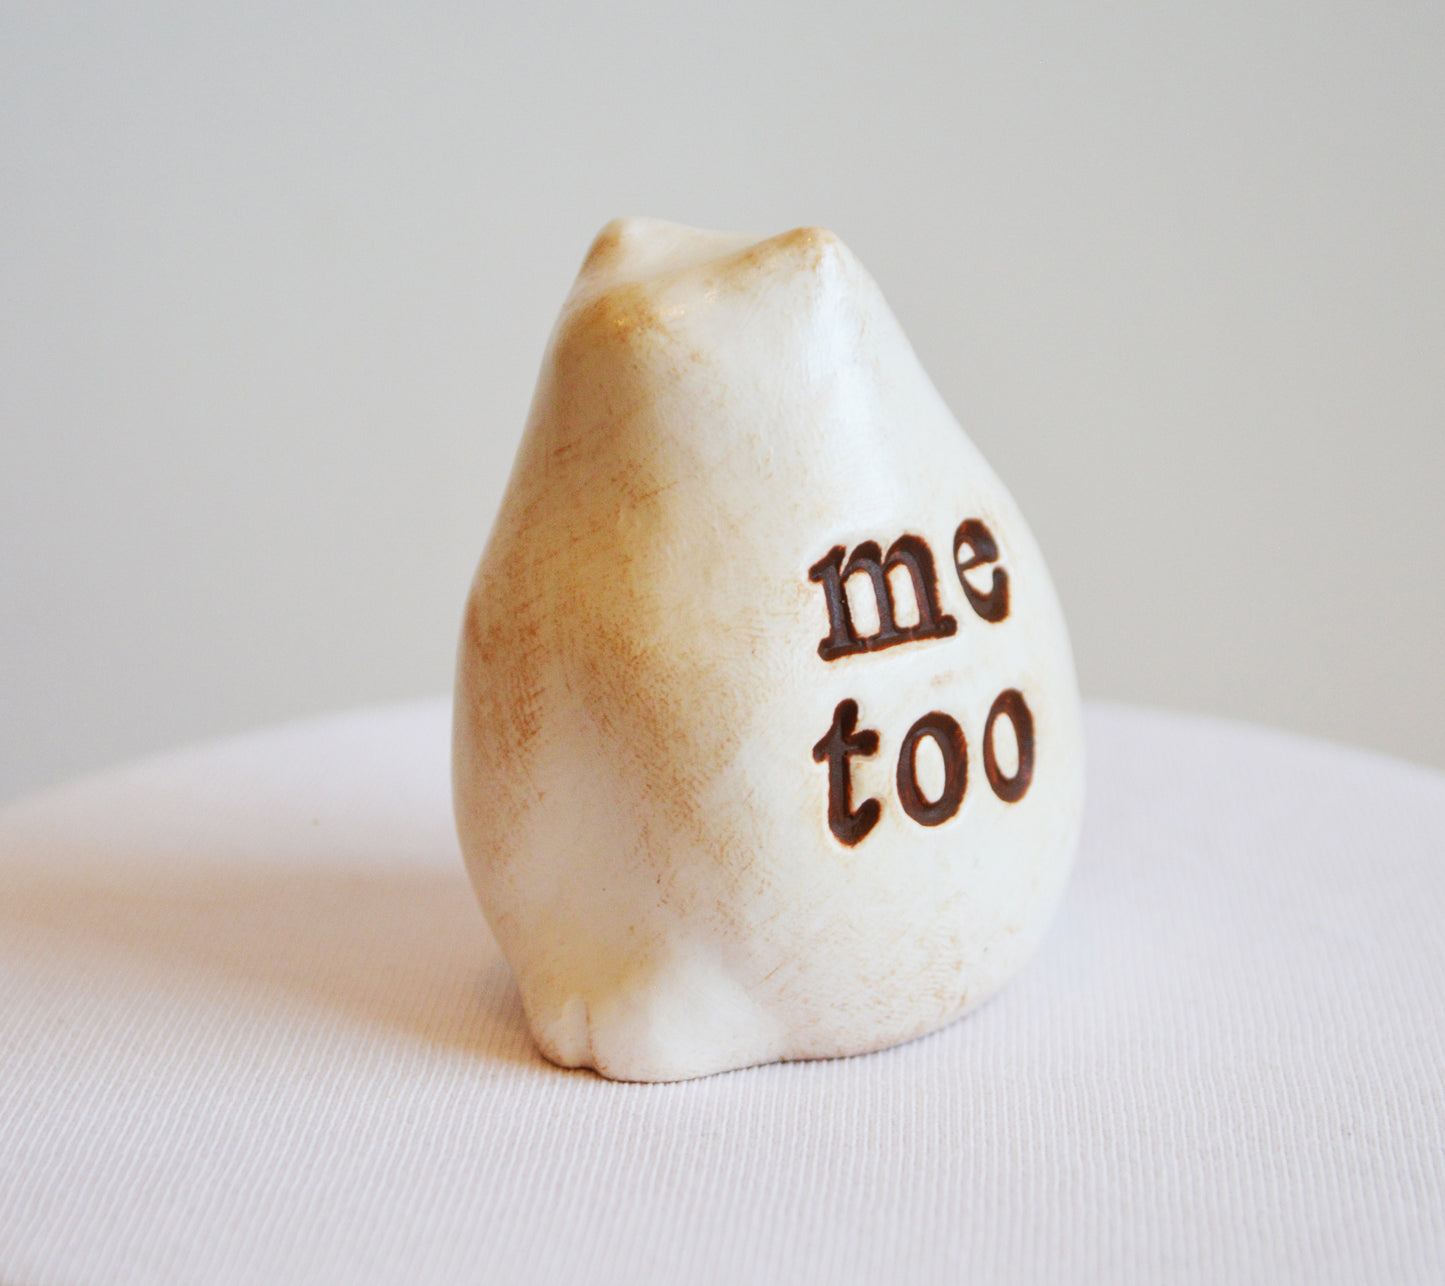 Cat wedding cake topper...vintage white i do, me too kitties / fat cats handmade toppers